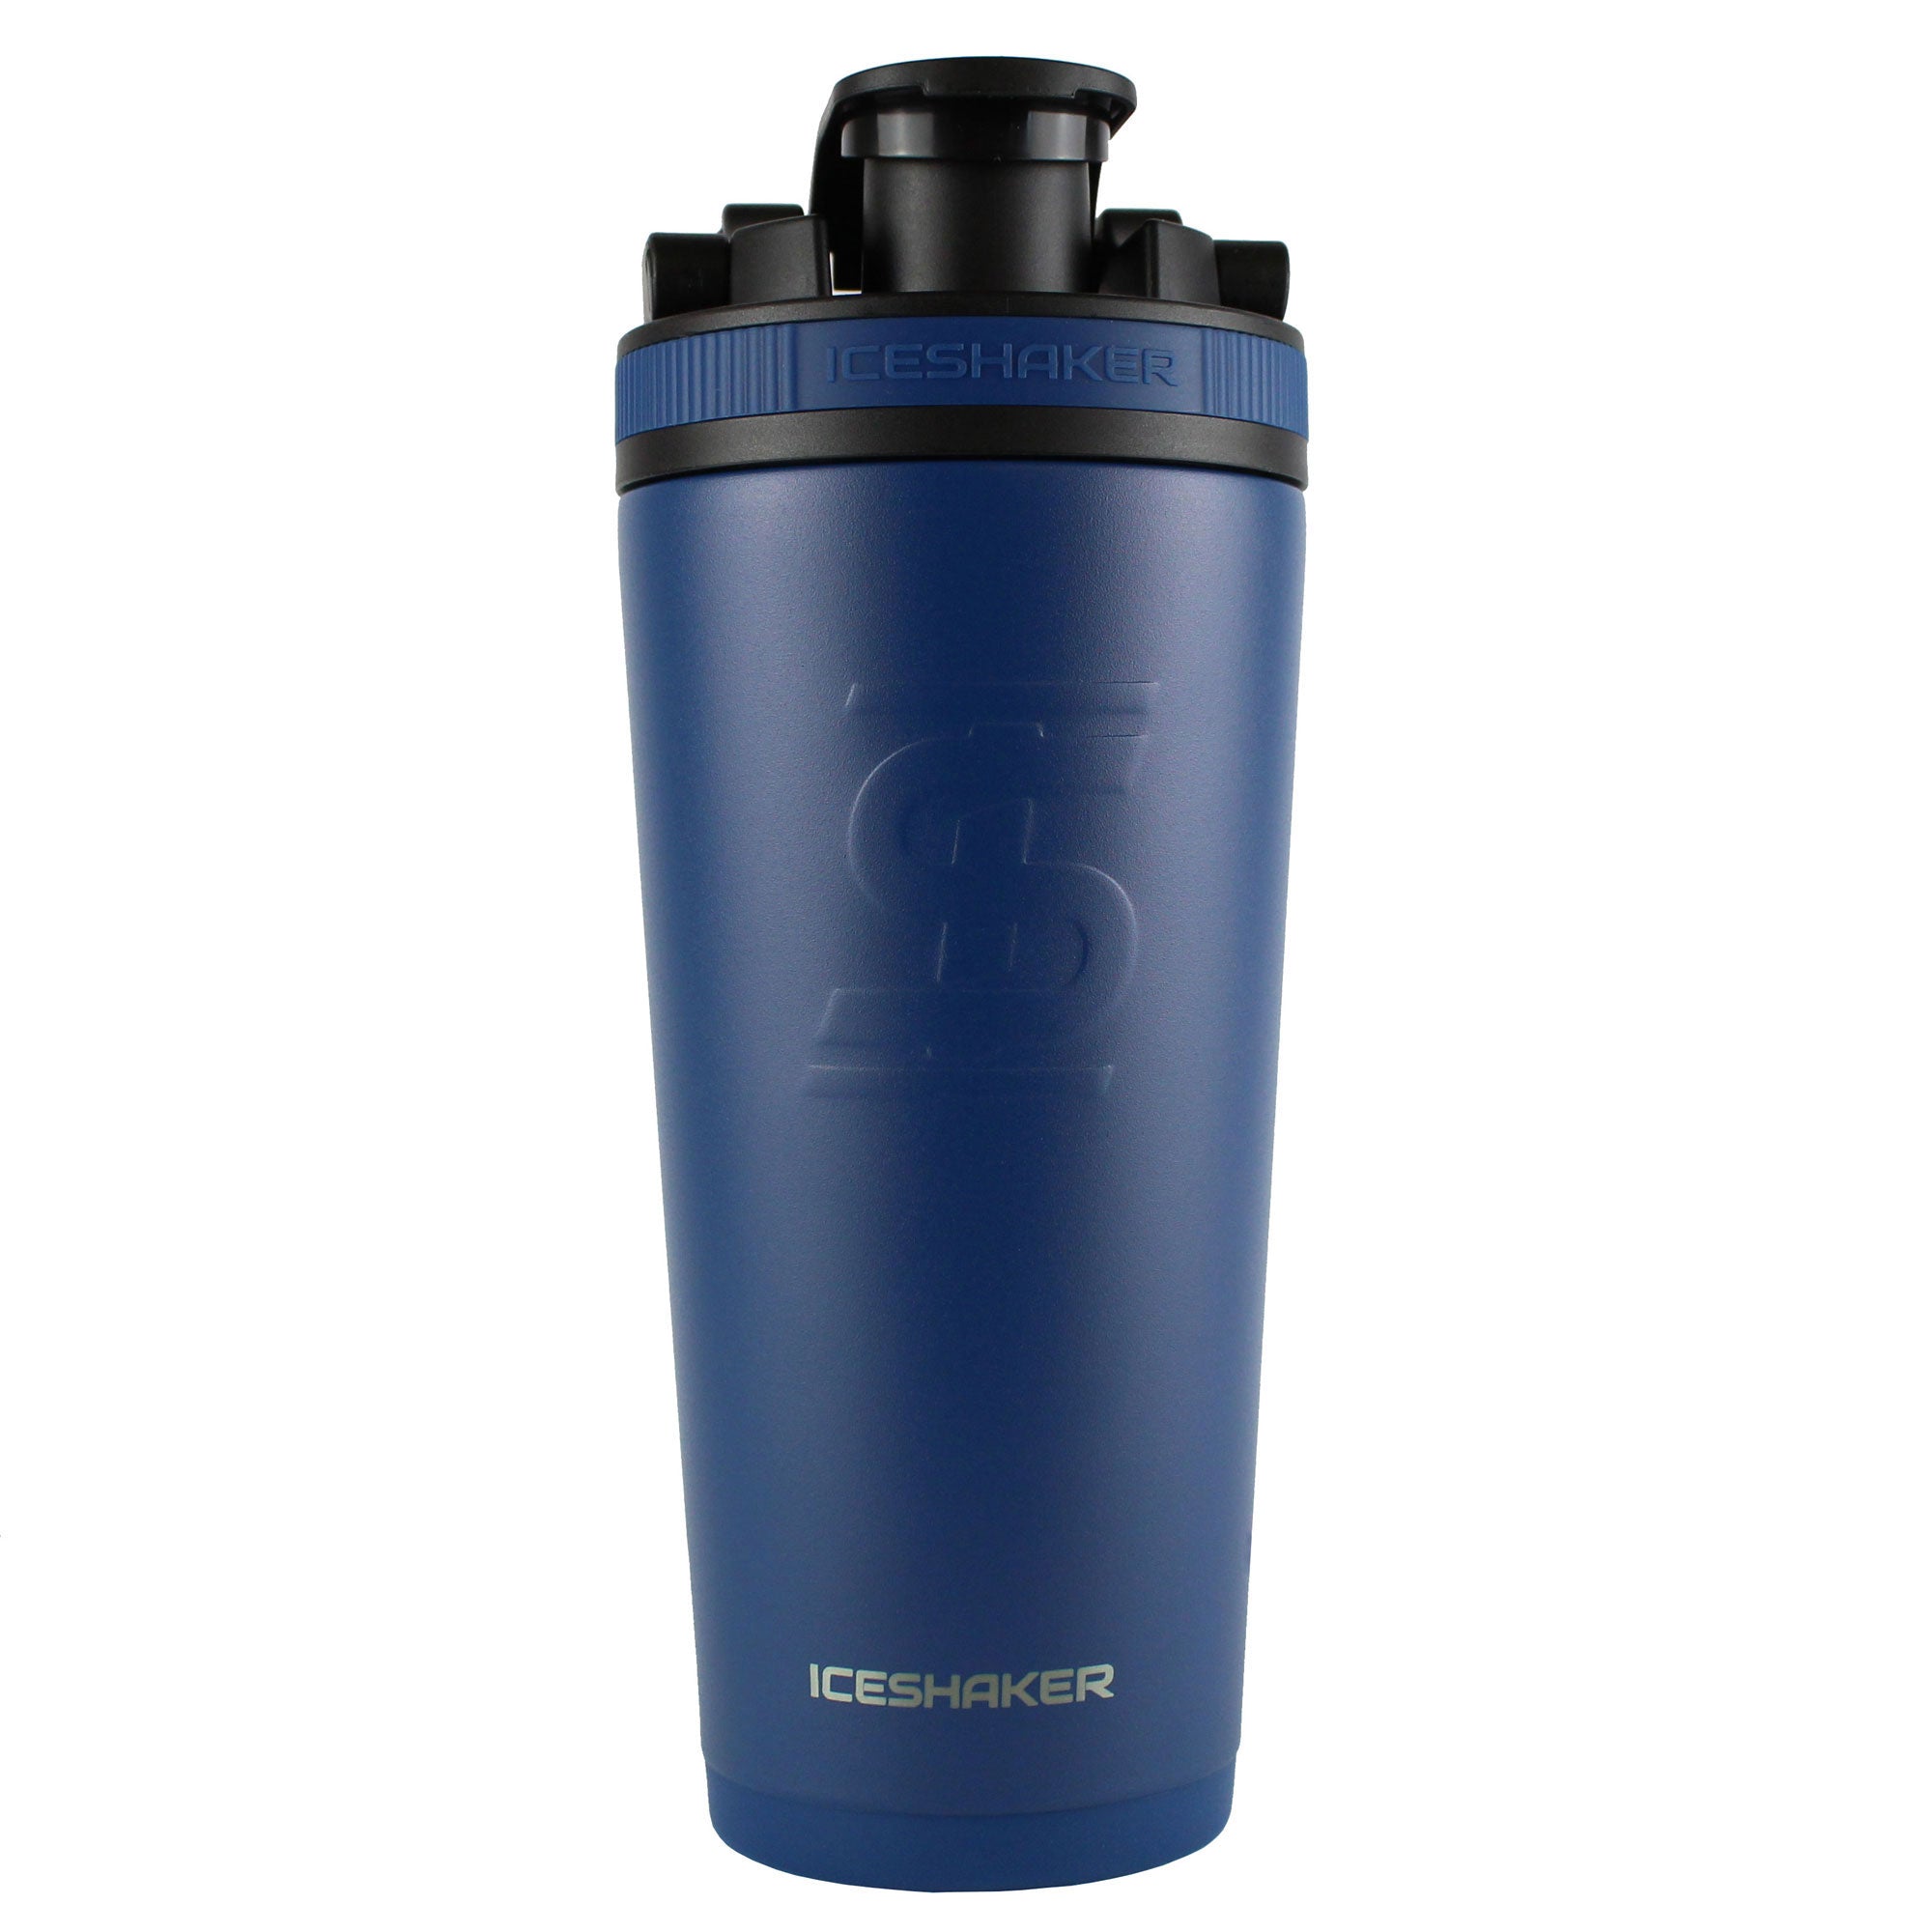 Officially Licensed Memphis Grizzlies 26oz Ice Shaker - Navy